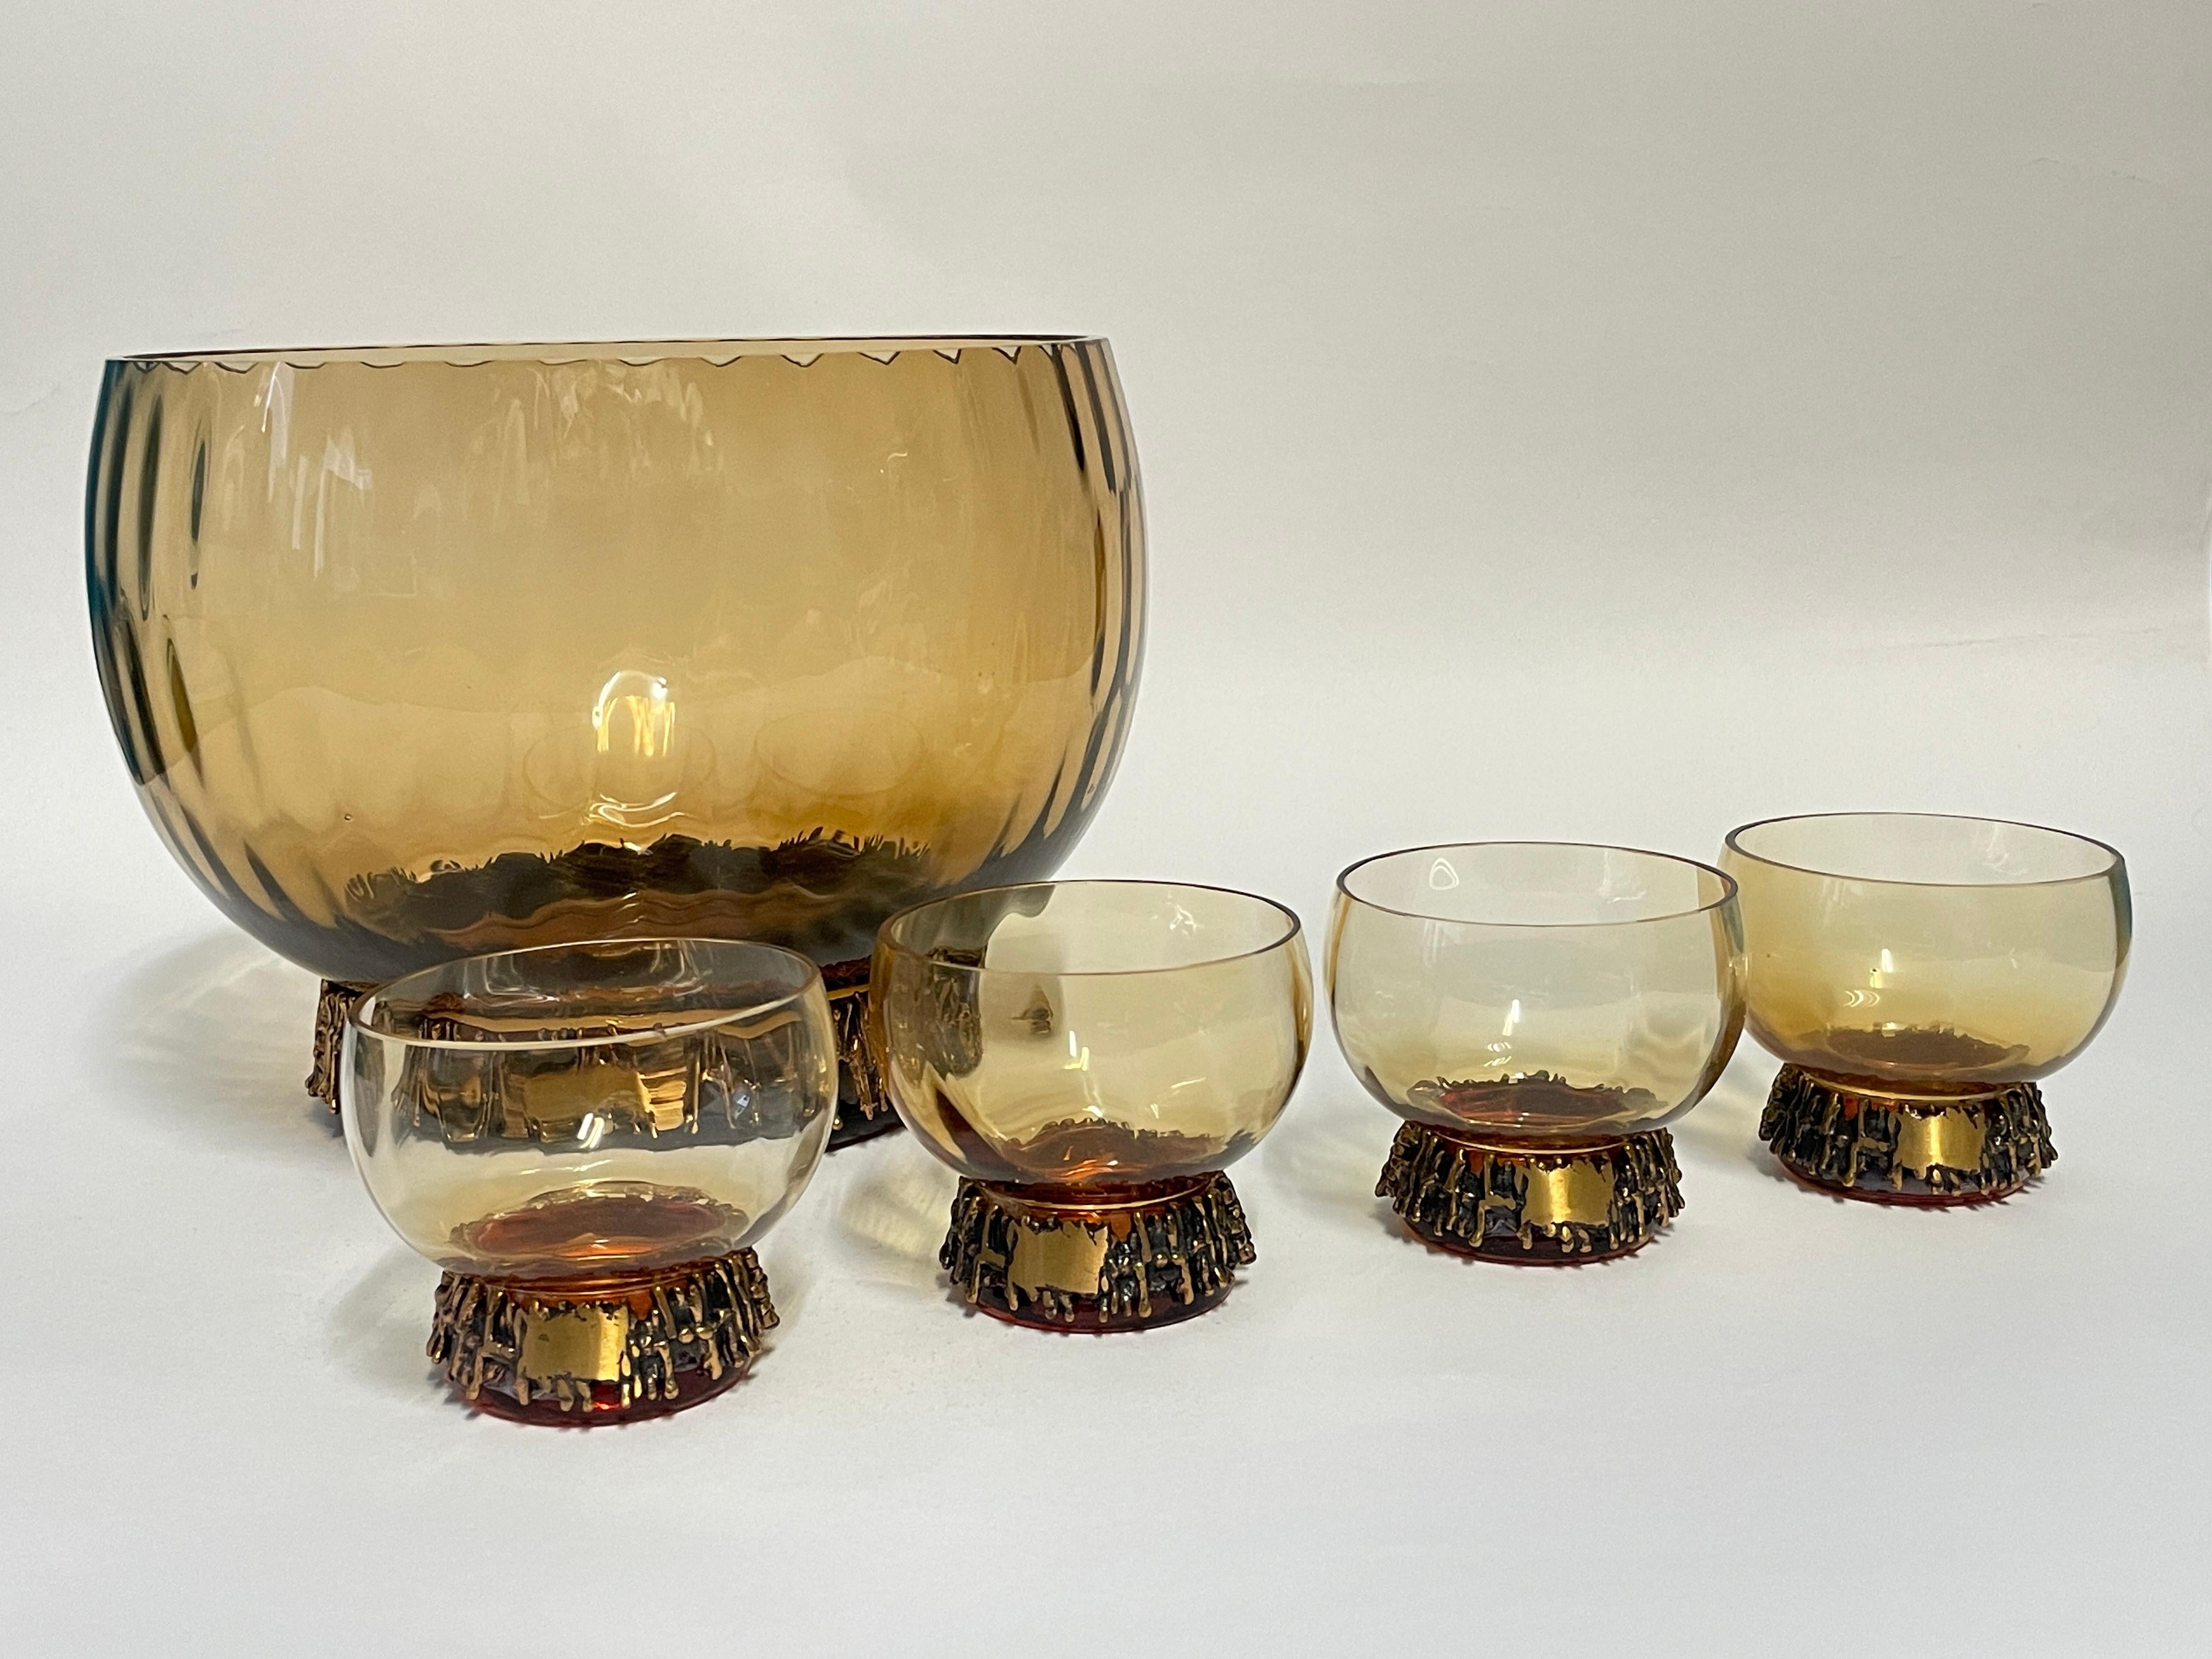 Scandinavian Modern Bronze/Glass Bowl and 4pcs Punch Glasses from 1960s by Pentti Sarpaneva For Sale